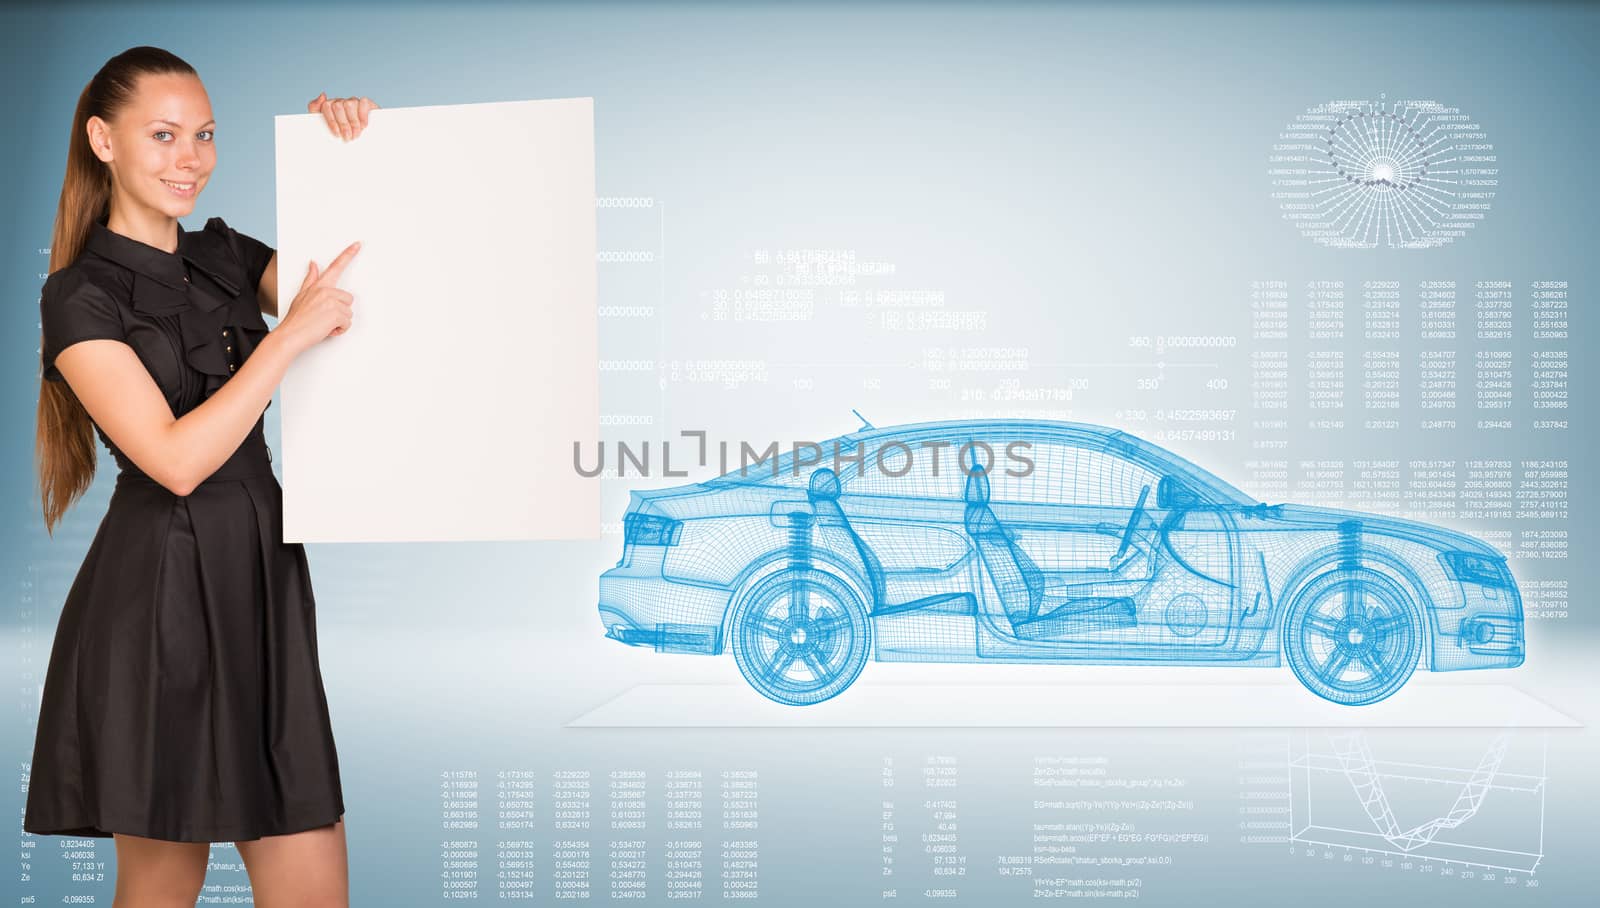 Businesswoman holding empty paper. Wire-frame car and graphs as backdrop